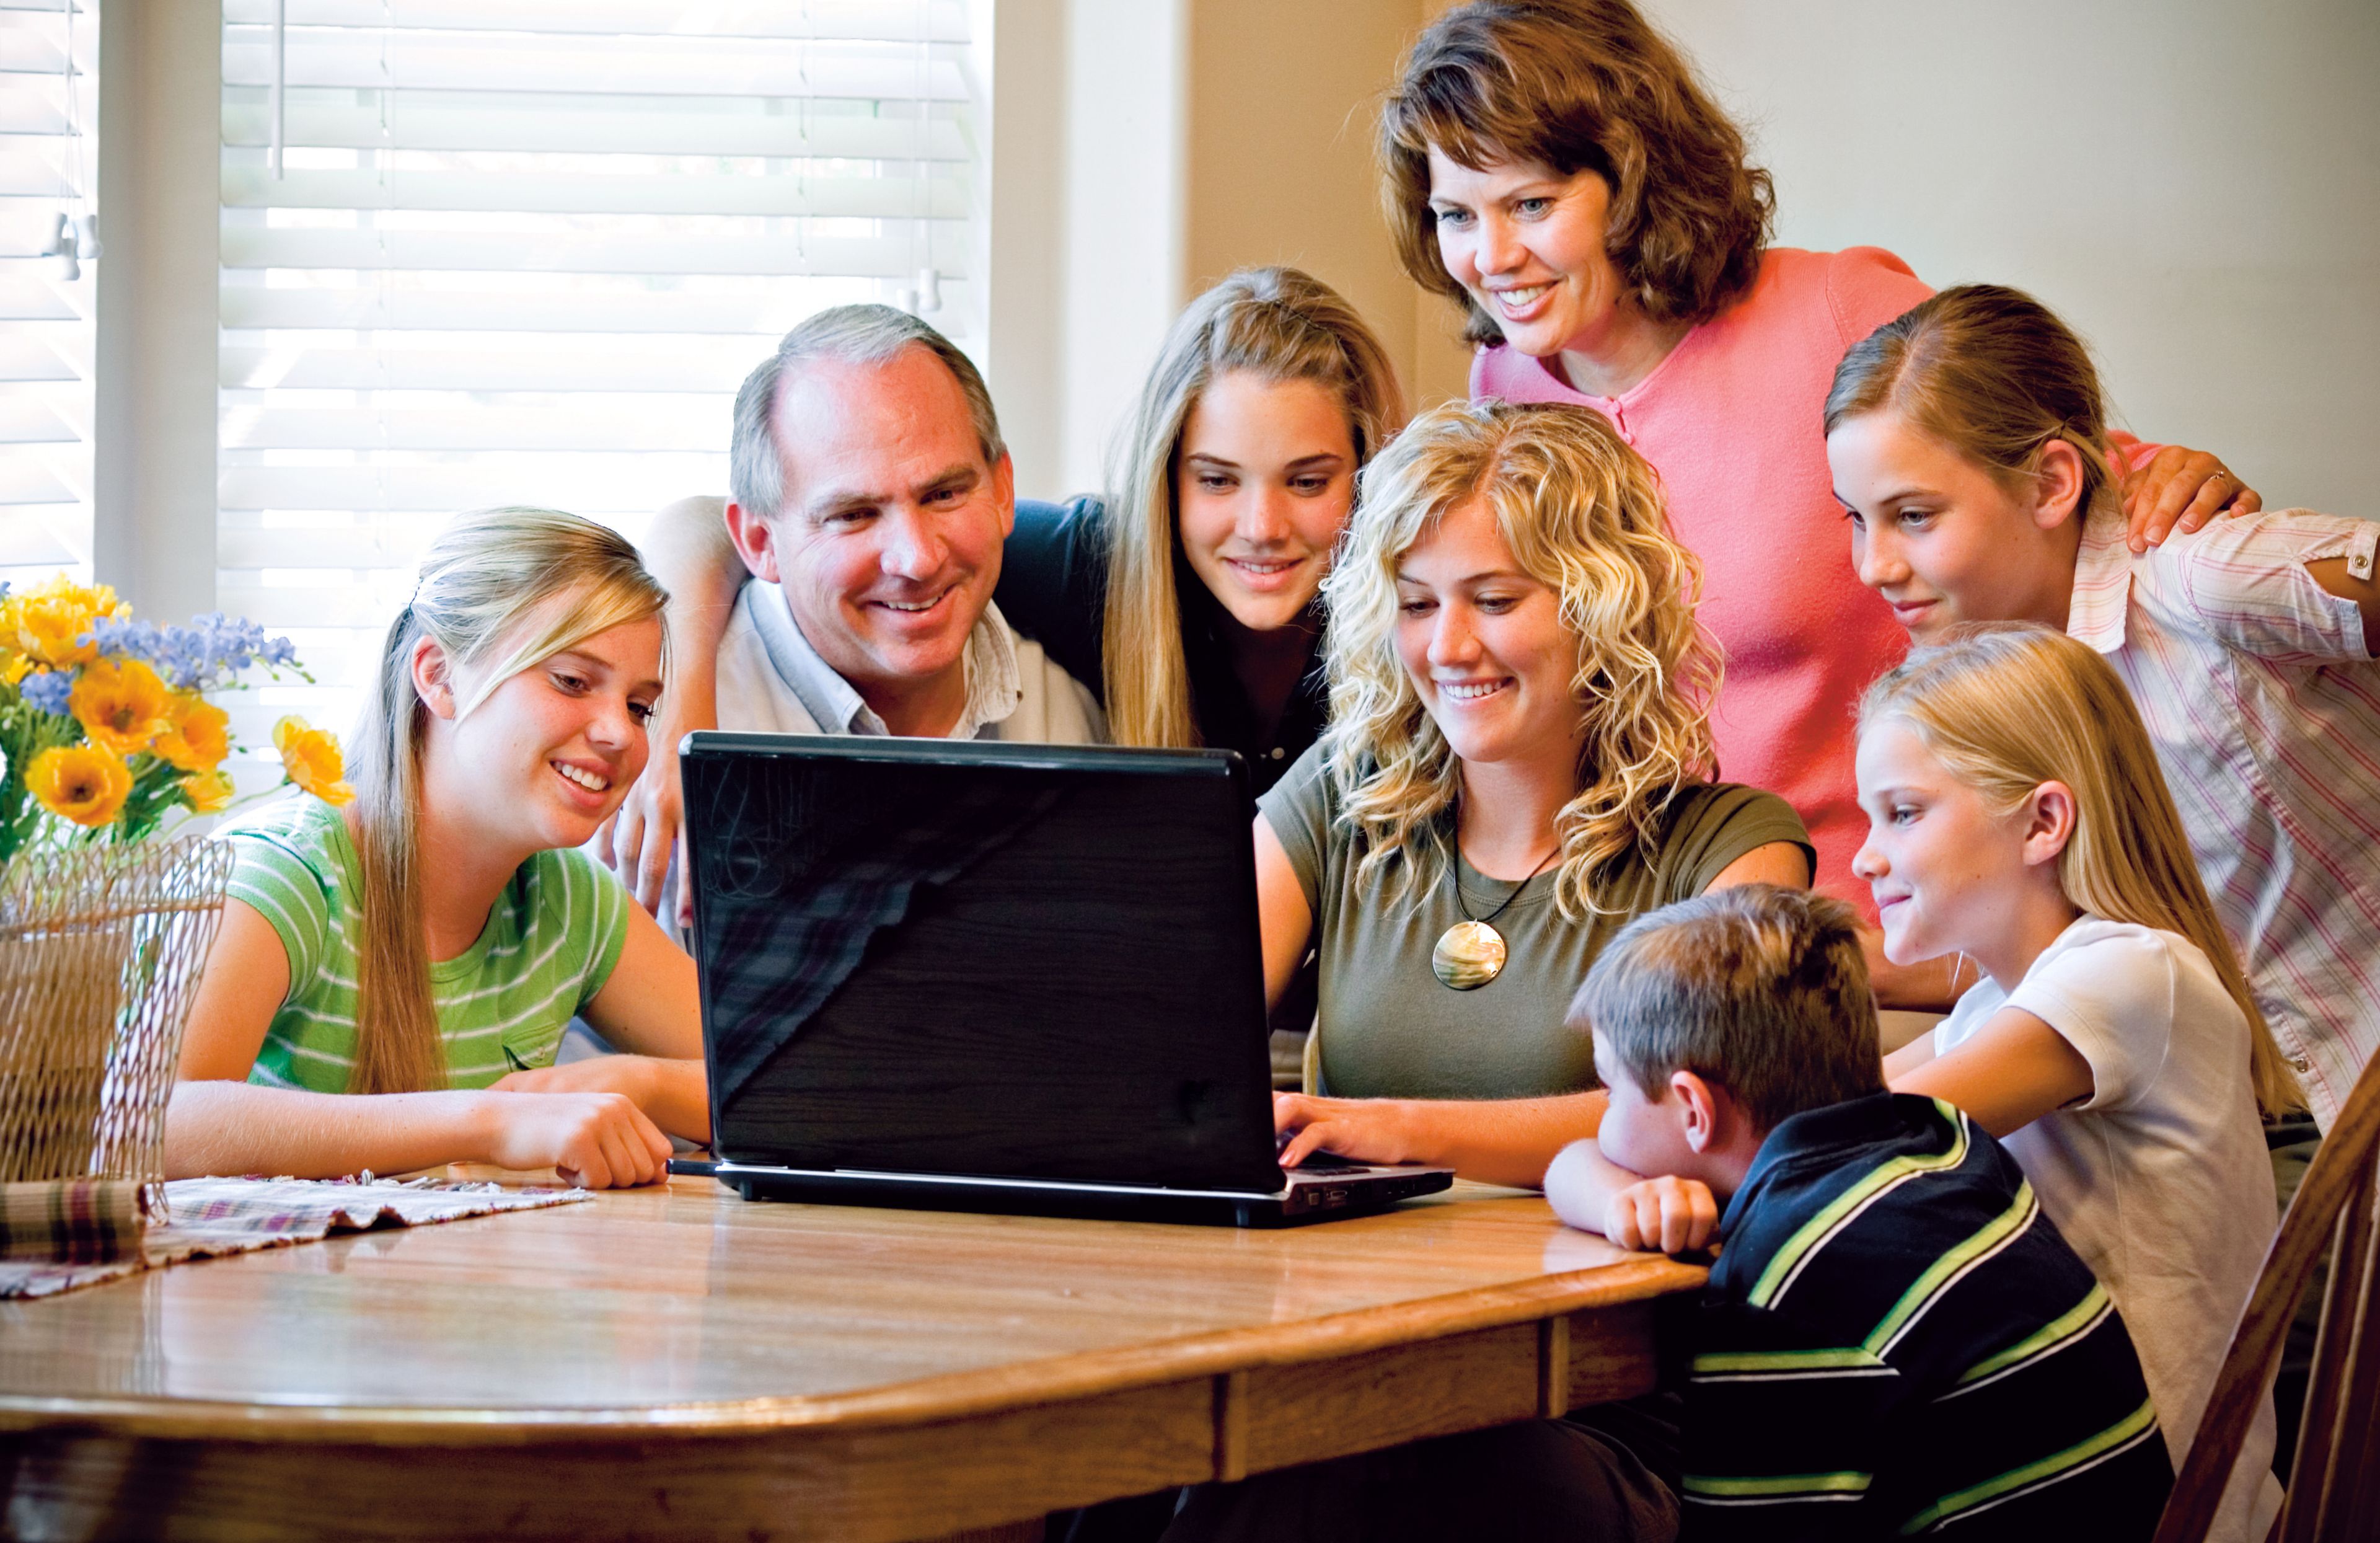 A family sitting around a table and looking at a computer together.